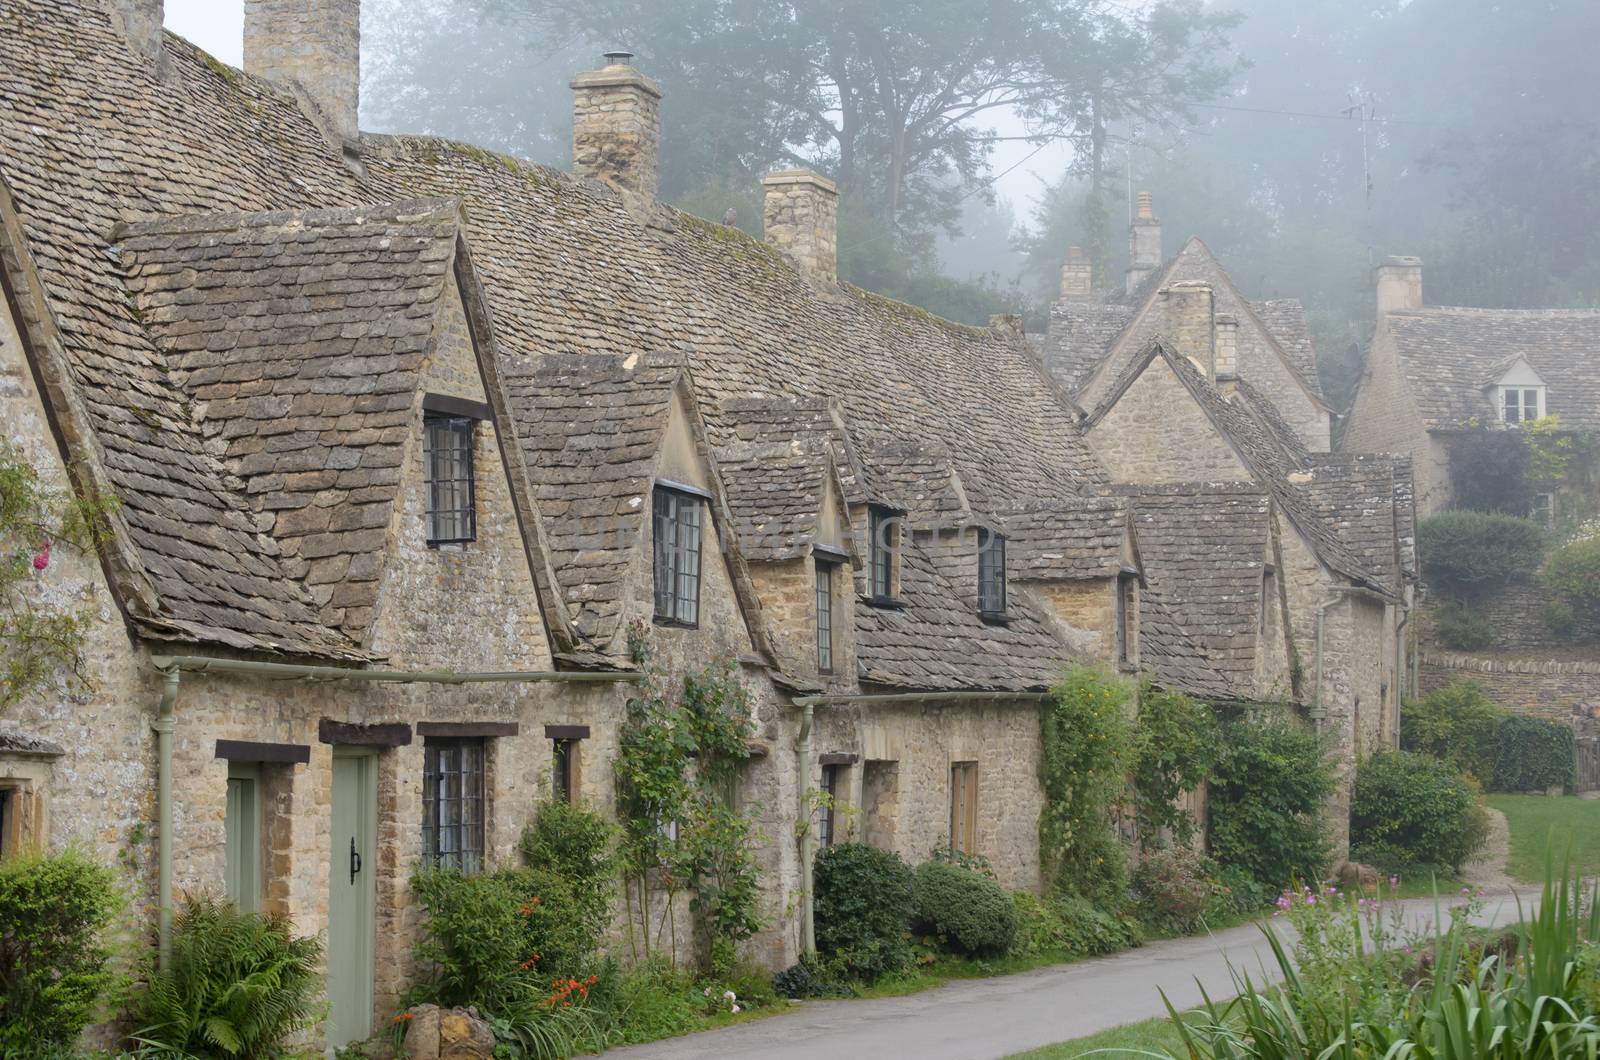 The Arlington Row, honey coloured weavers cottages in the morning fog in the town of Bibury in Gloucestershire in the Cotswolds, England, UK. The houses were built in 1380. 